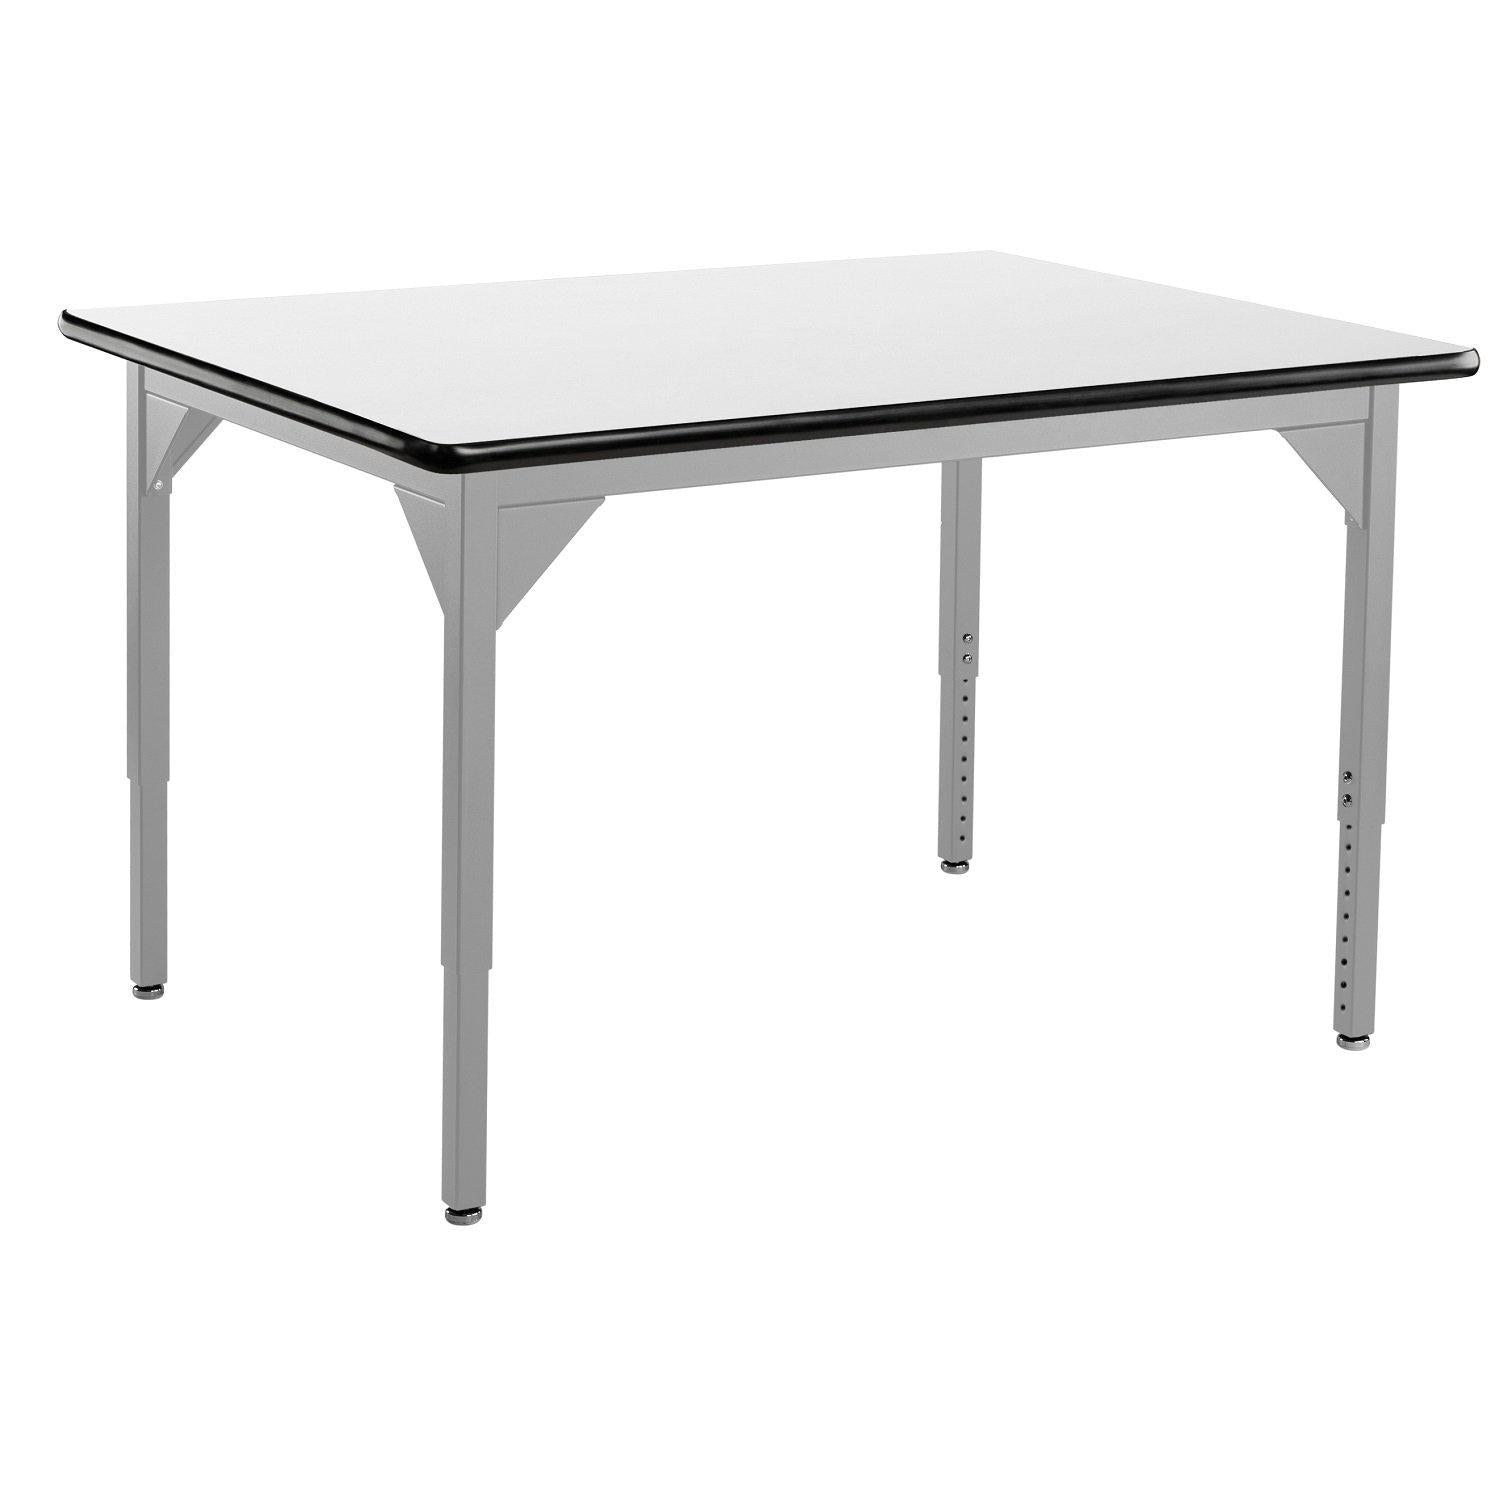 Heavy-Duty Height-Adjustable Utility Table, Soft Grey Frame, 36" x 42", Whiteboard High-Pressure Laminate Top